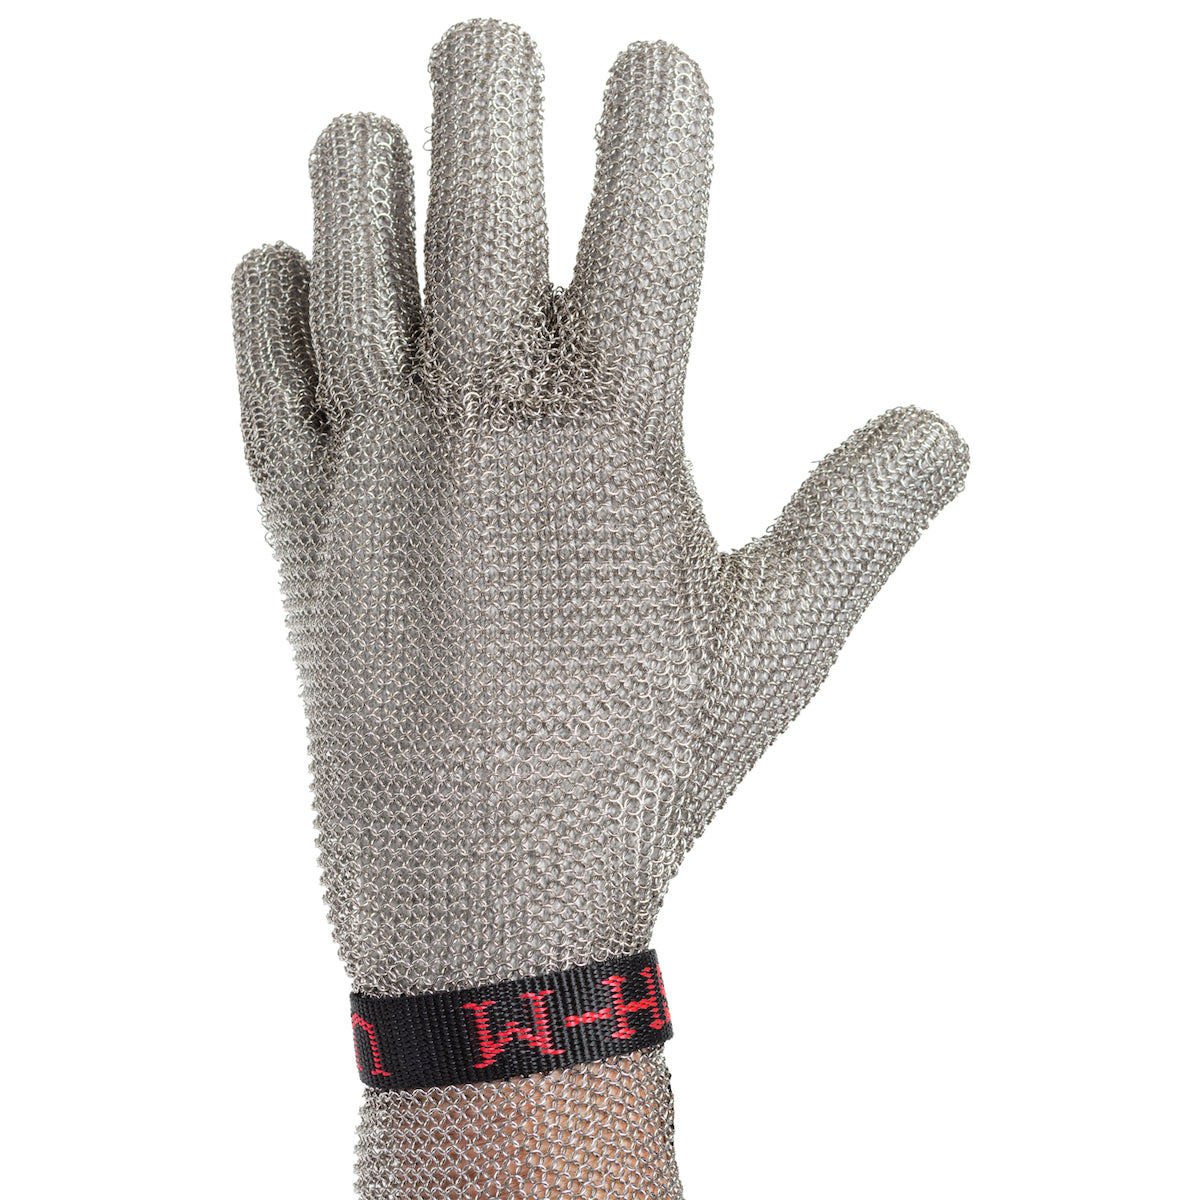 US Mesh USM-1350-S Stainless Steel Mesh Glove with Reinforced Finger Crotch and Adjustable Straps - Forearm Length